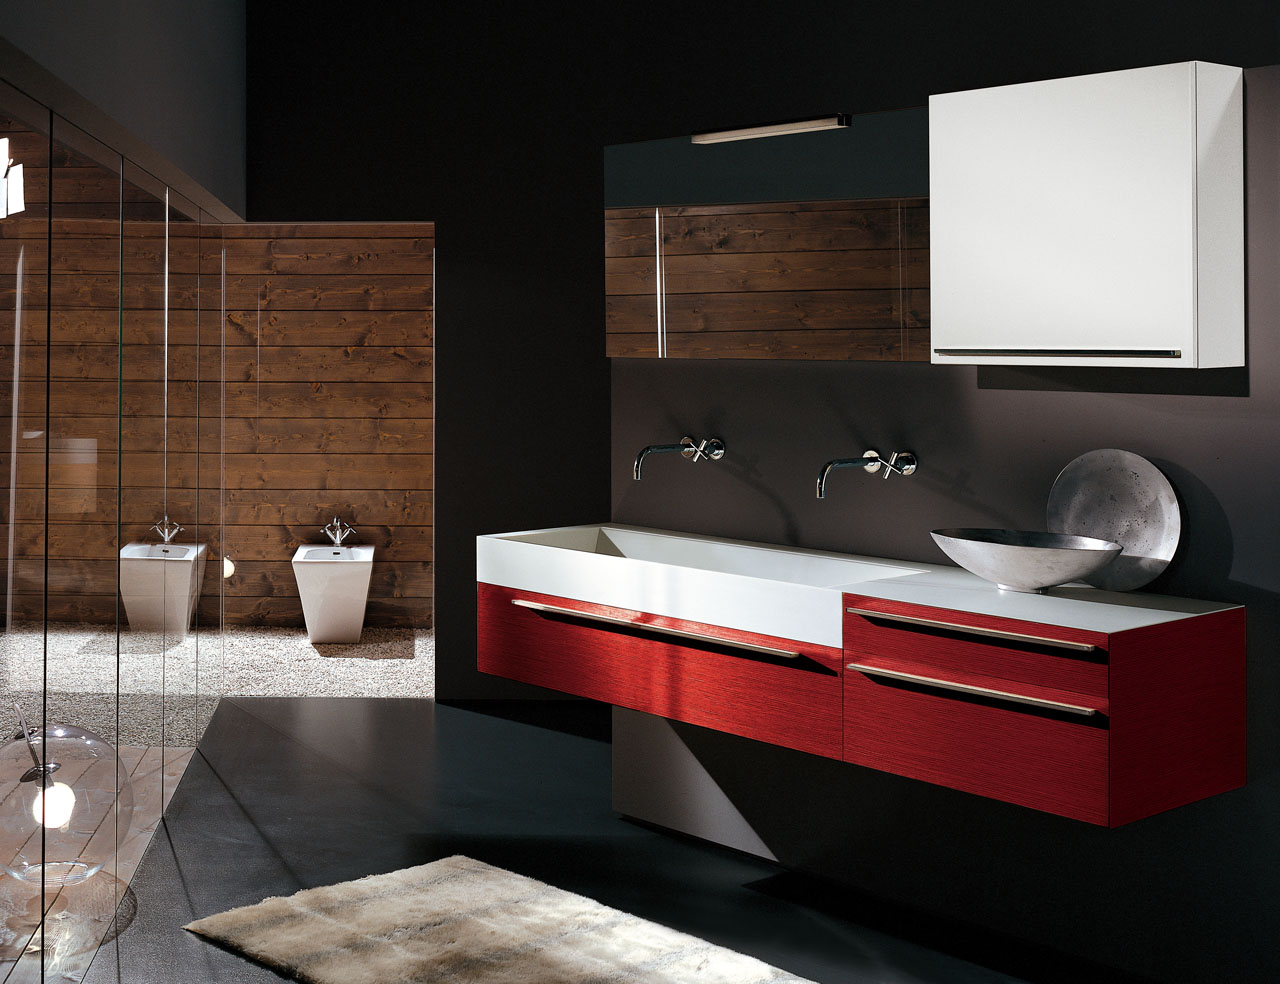 25 Latest Contemporary Bathrooms Design Ideas - The WoW Style